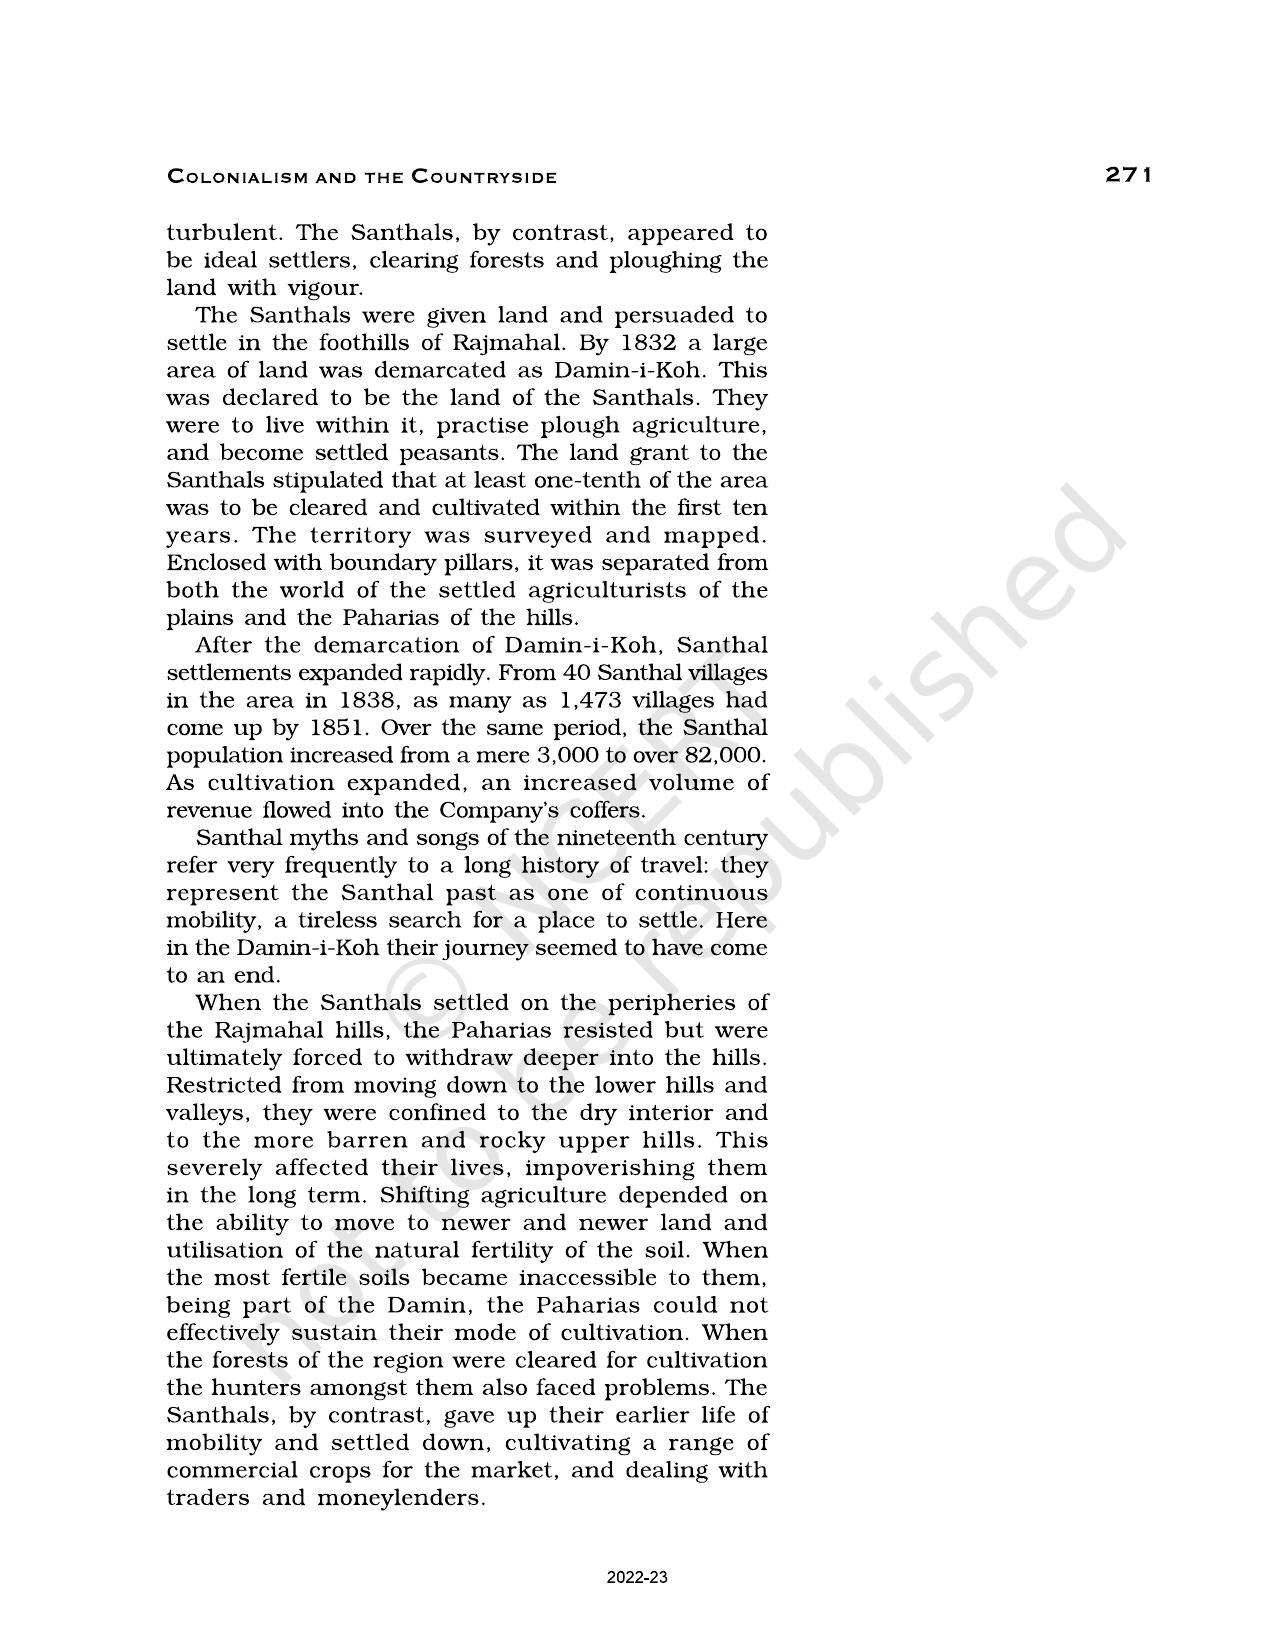 NCERT Book for Class 12 History (Part-II) Chapter 10 Colonialism and the Countryside - Page 15